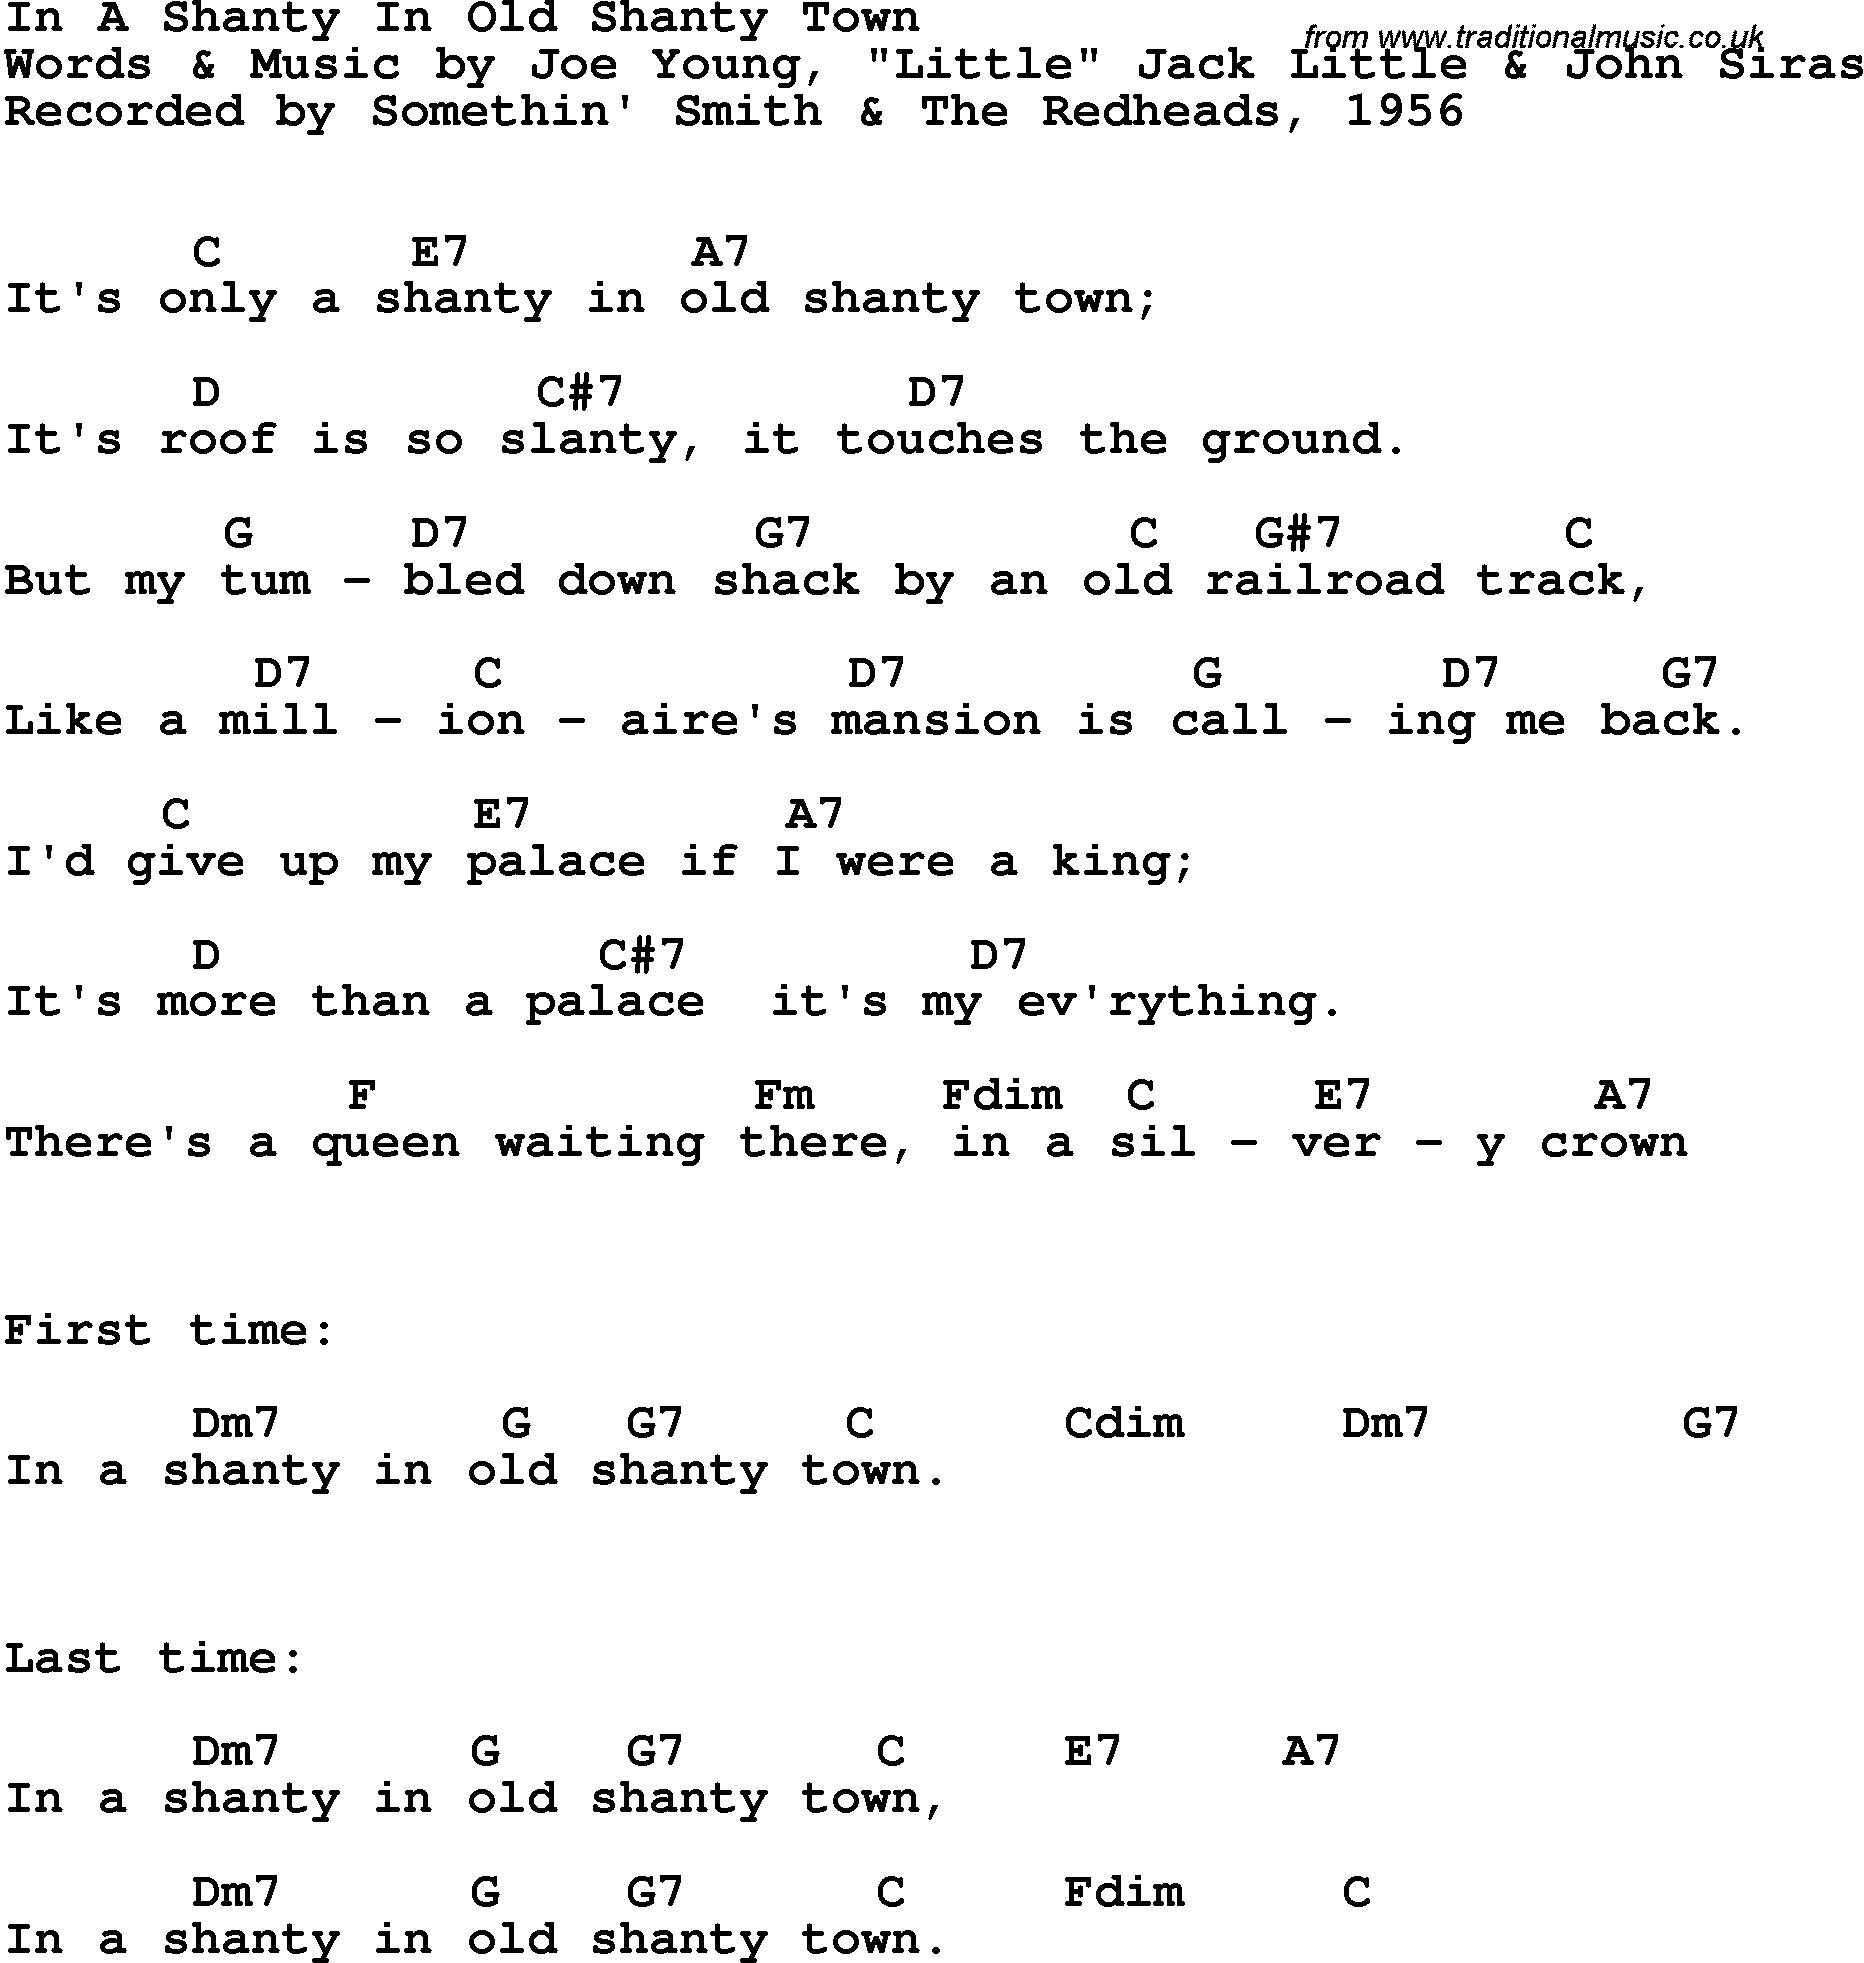 Song Lyrics with guitar chords for In A Shanty In Old Shanty Town - Somethin' Smith, 1956